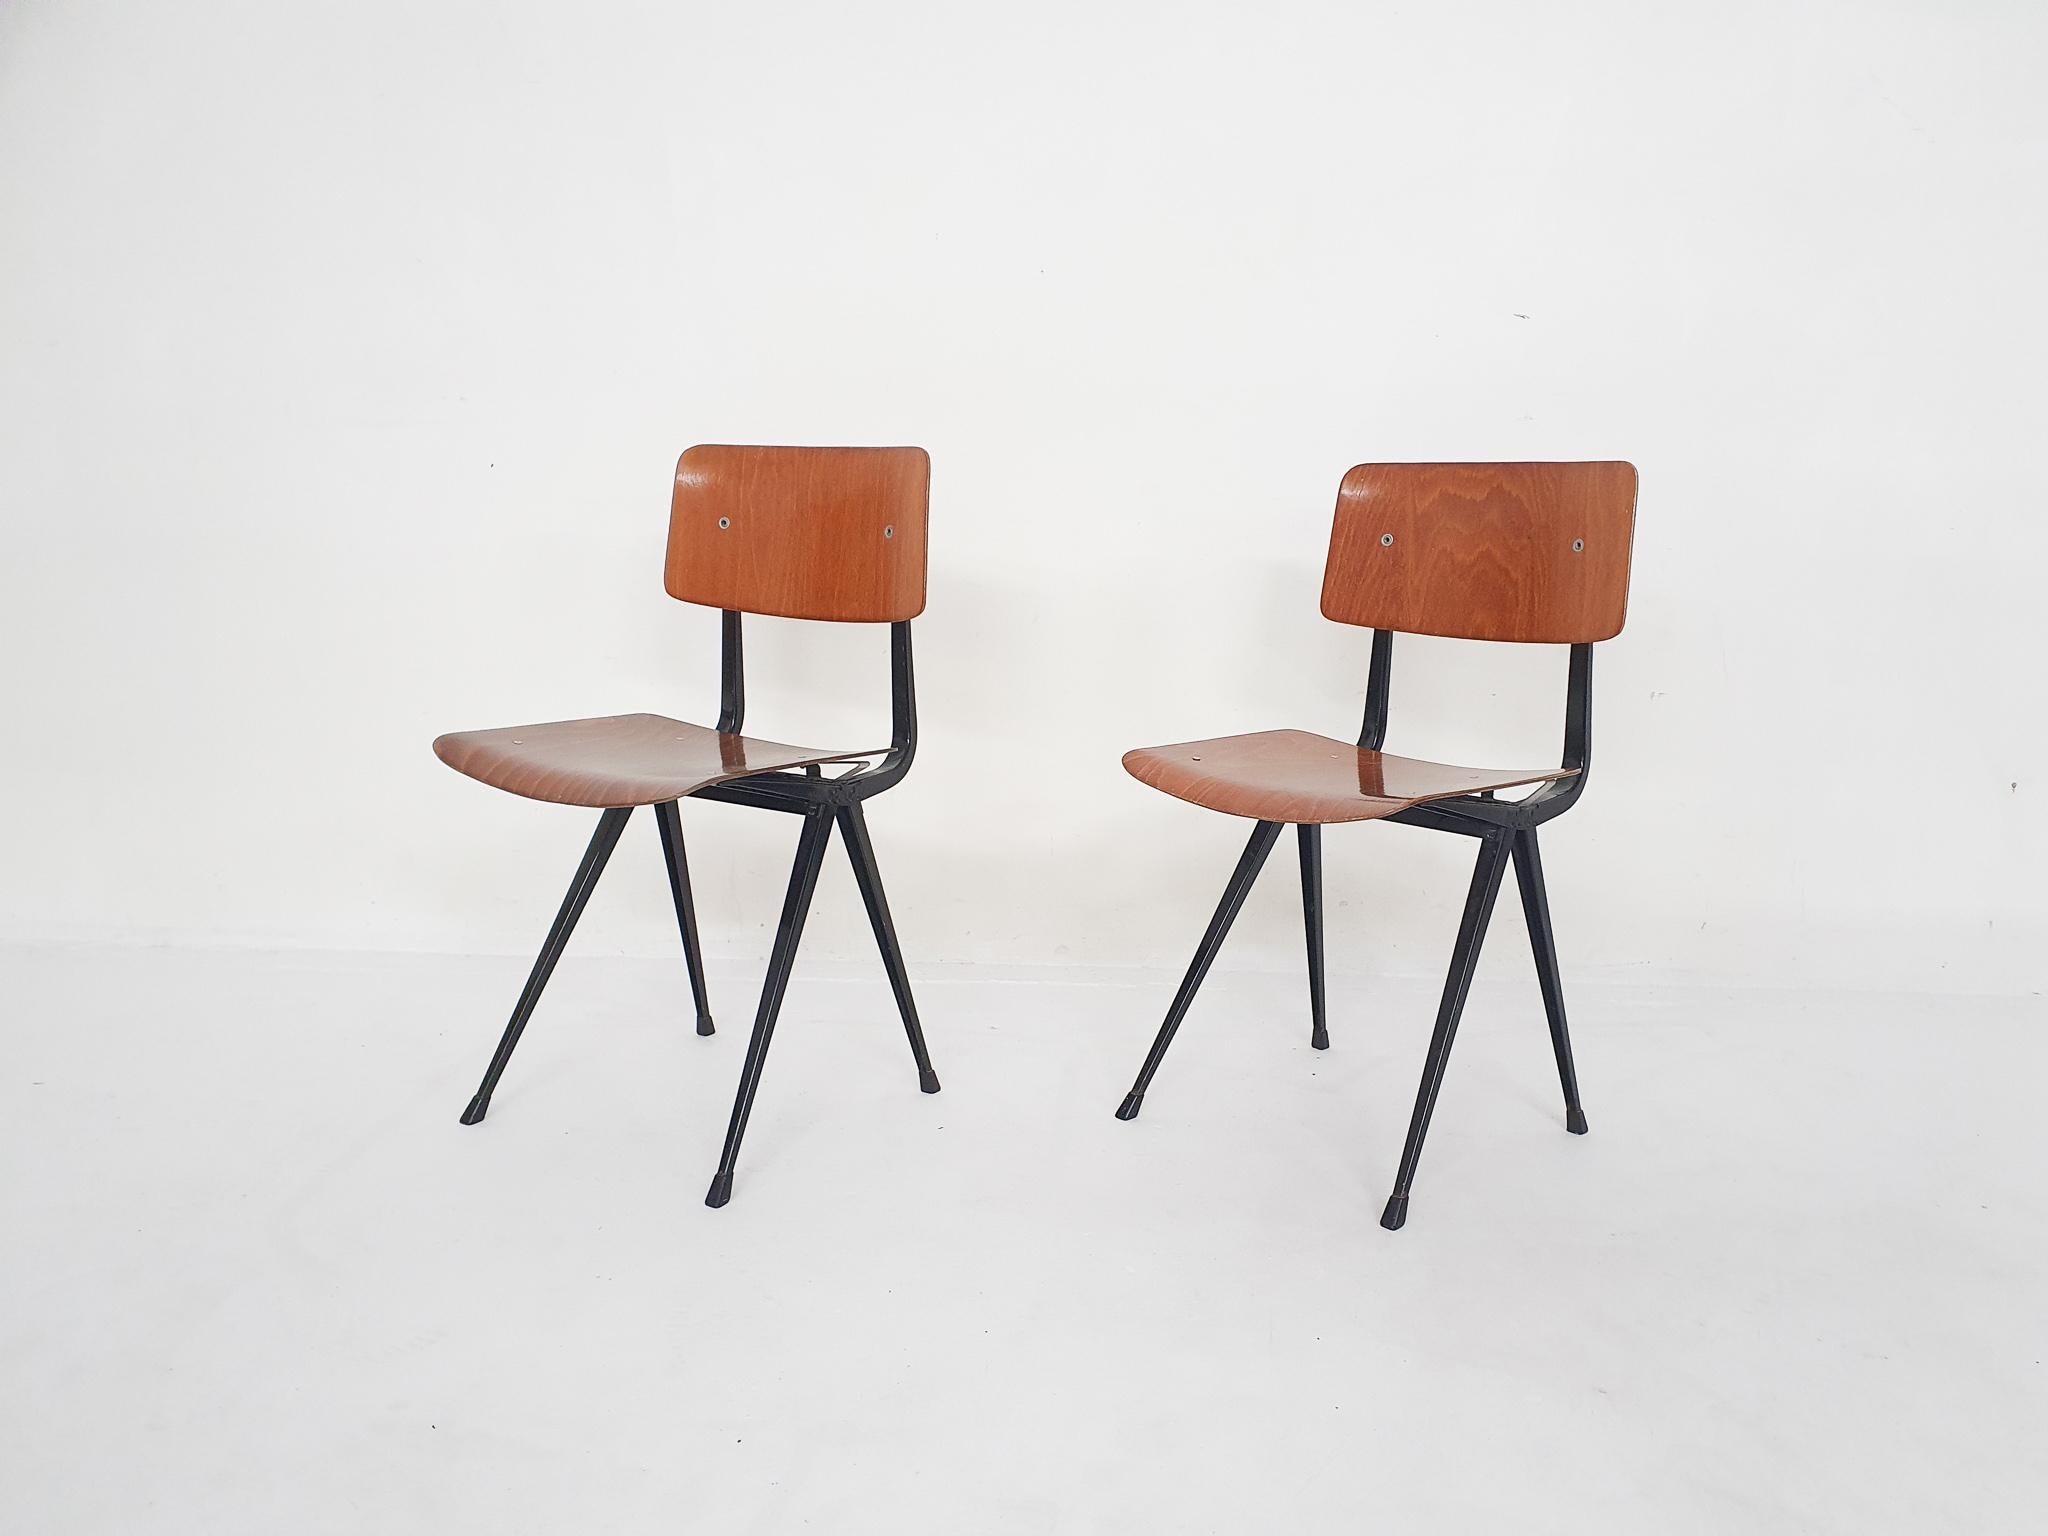 Set of two plywood industrial school chairs by Friso Kramer for Ahrend. In good original condition
Marked in the frame

Friso Kramer
Kramer is the son of architect Piet Kramer. In 1963 he founded, together with Wim Crouwel, Benno Wissing, Paul and